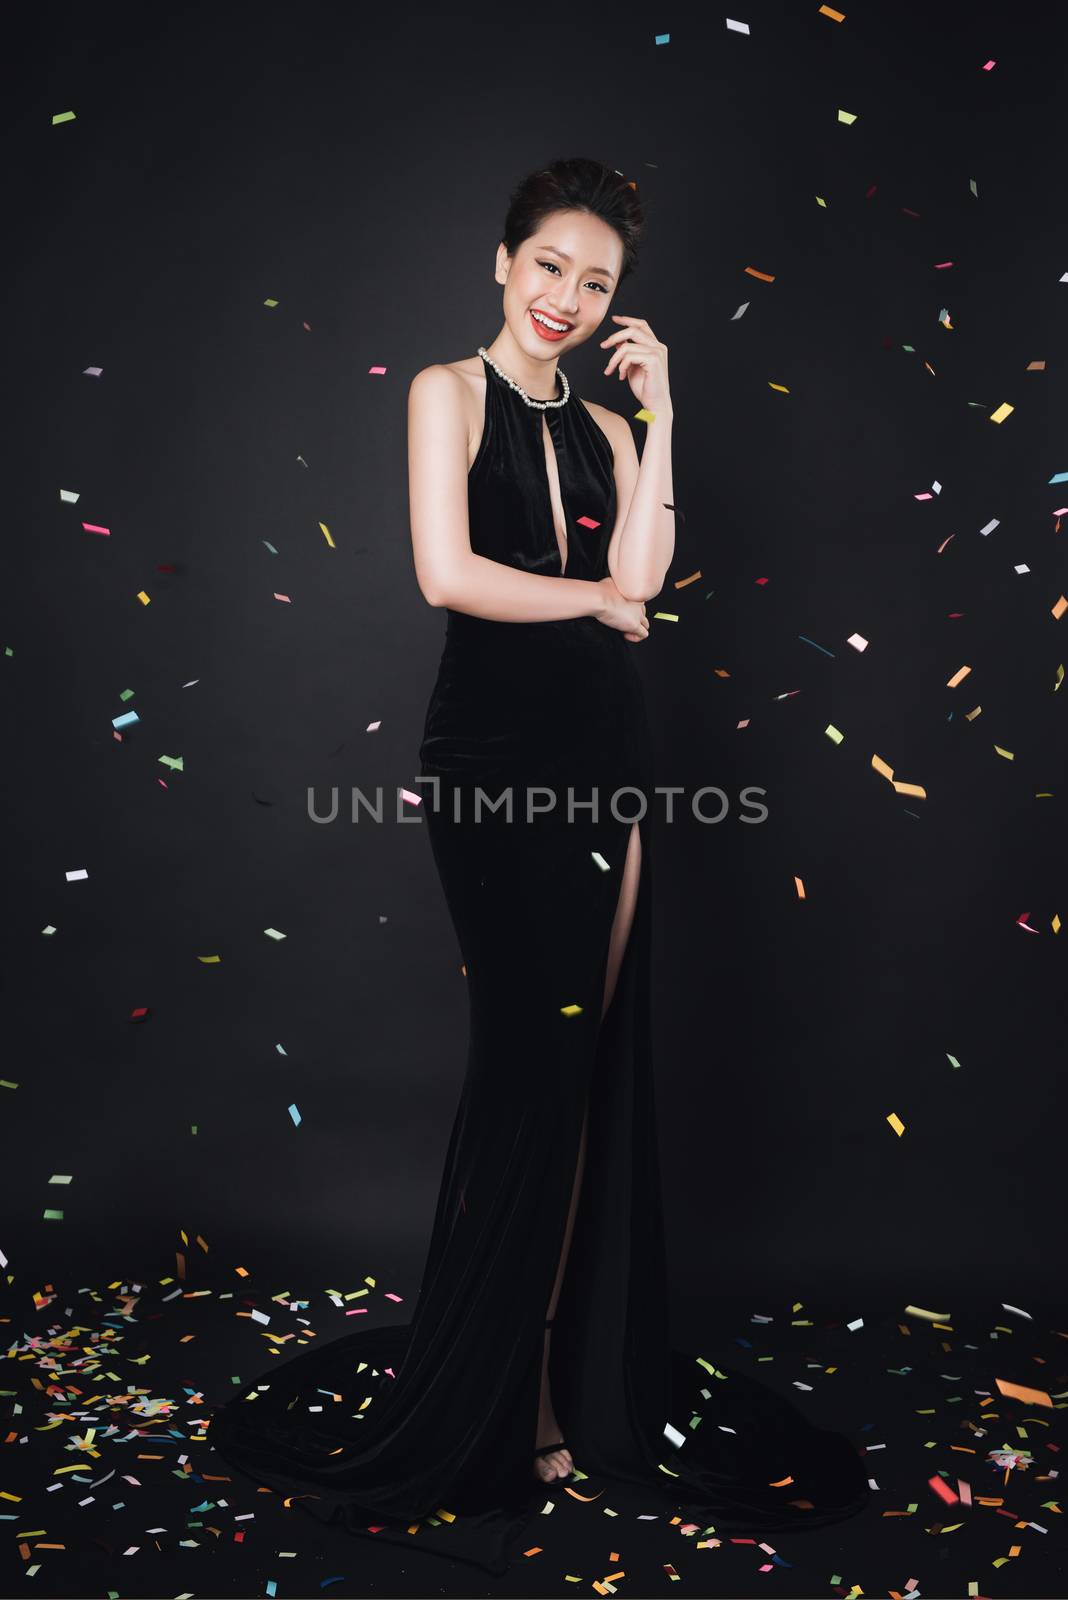 Asian woman with fashion makeup in luxury black dress while confetti falling on her.